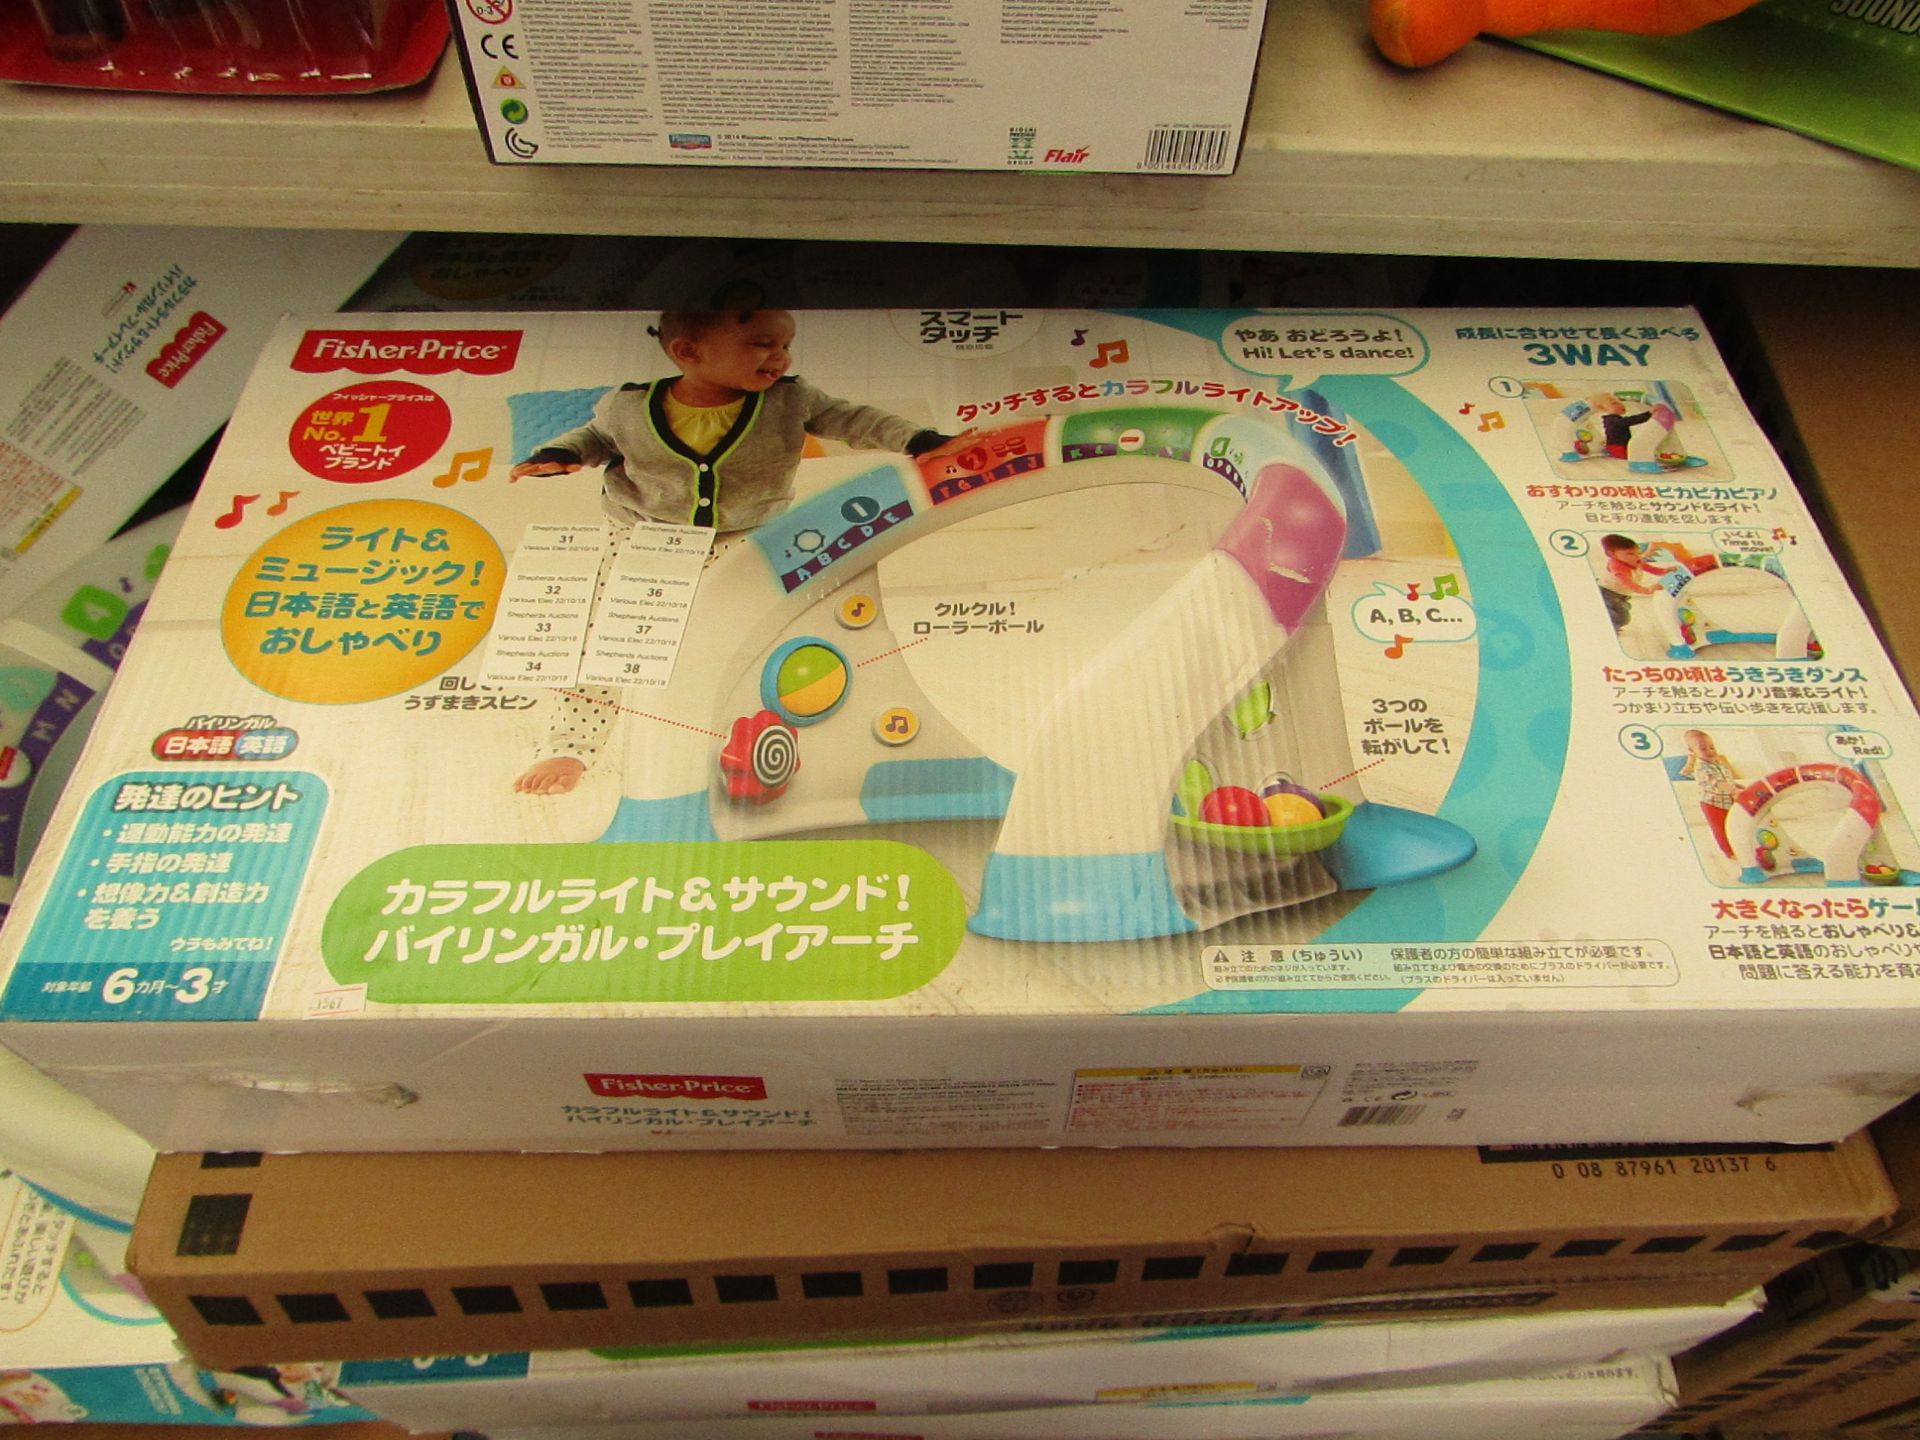 Fisherprice bright beats smart touch playset. Box is in foreign language. Unchecked and boxed.